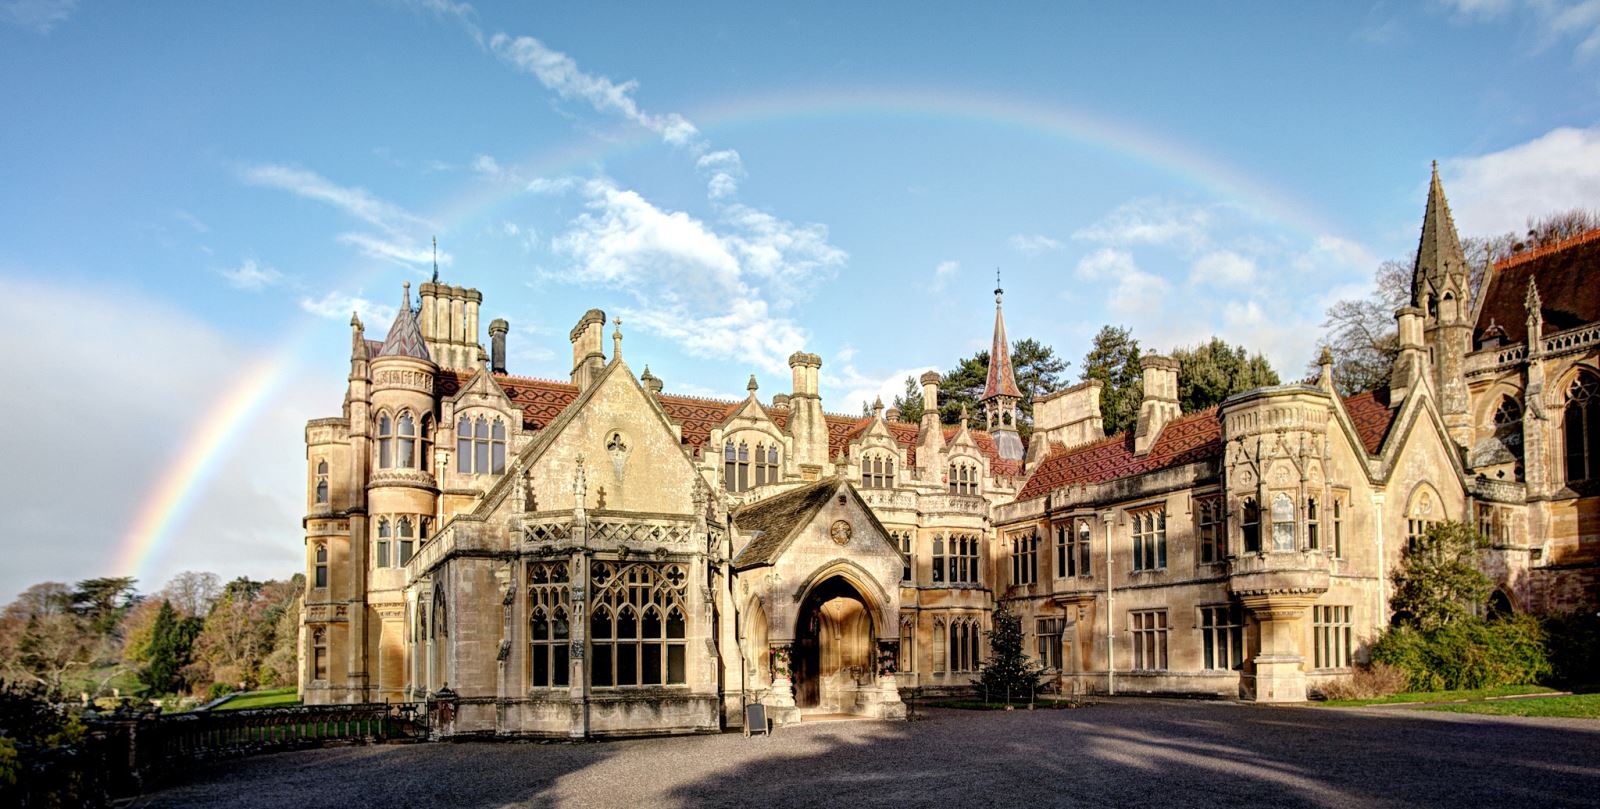 A rainbow over a stately home